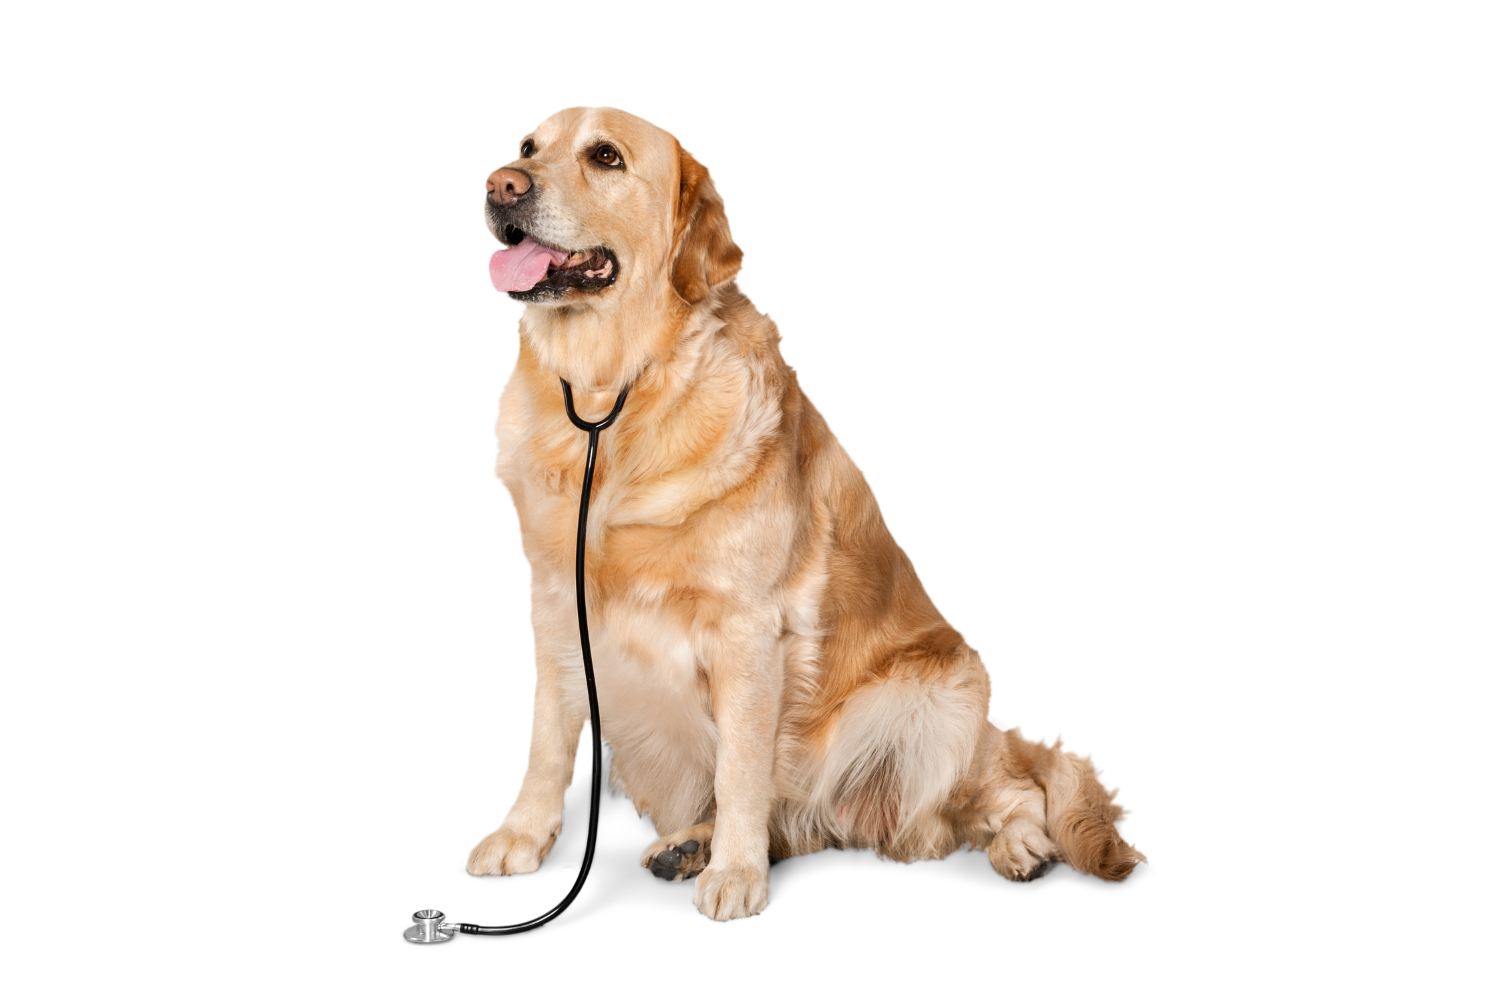 A Dog with Stethoscope